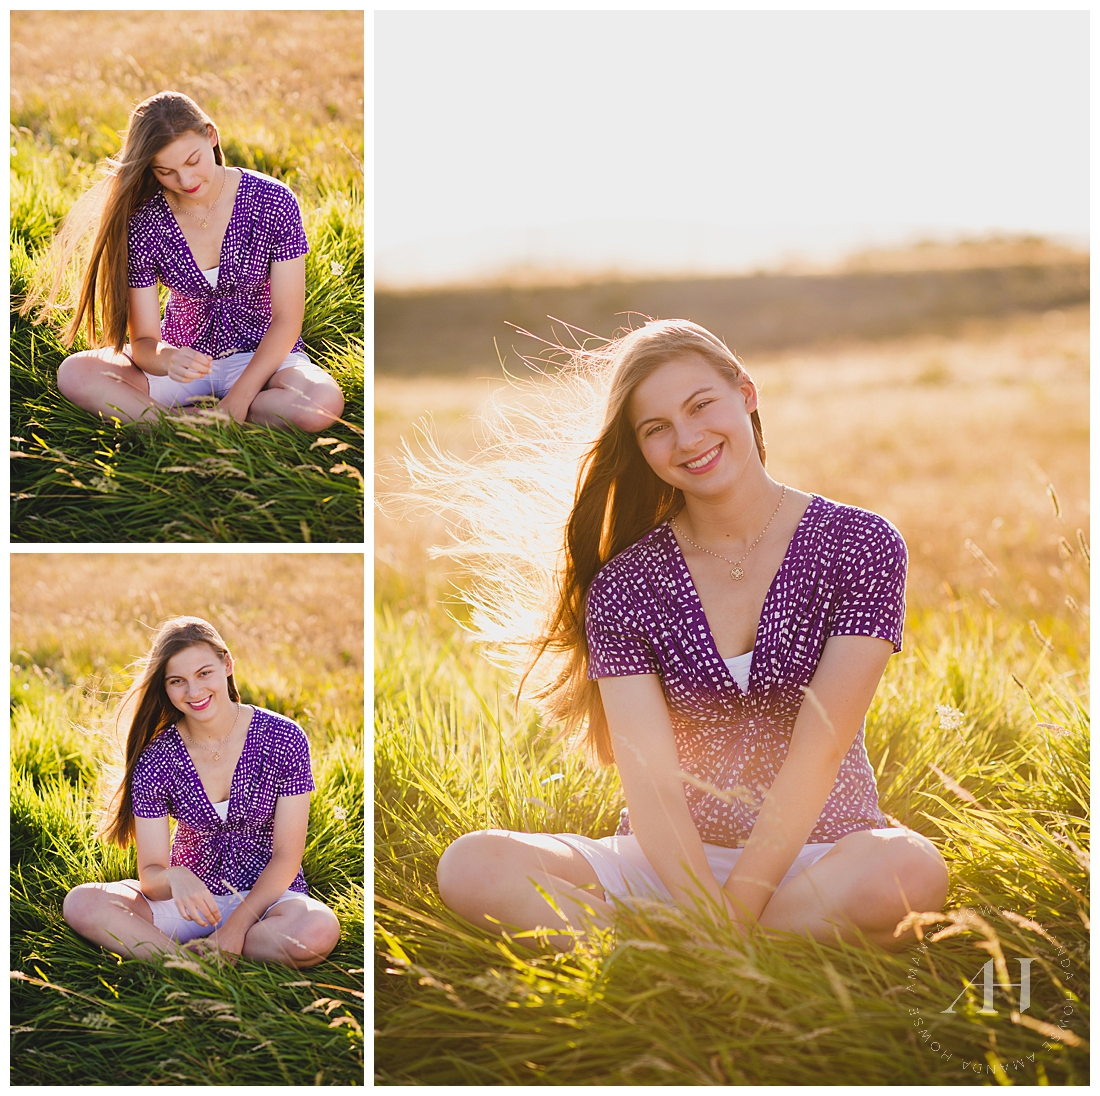 Sunny Senior Portraits | Senior Girl in Grassy Meadow with Cute Outfit | Photographed by the Best Tacoma Senior Photographer Amanda Howse